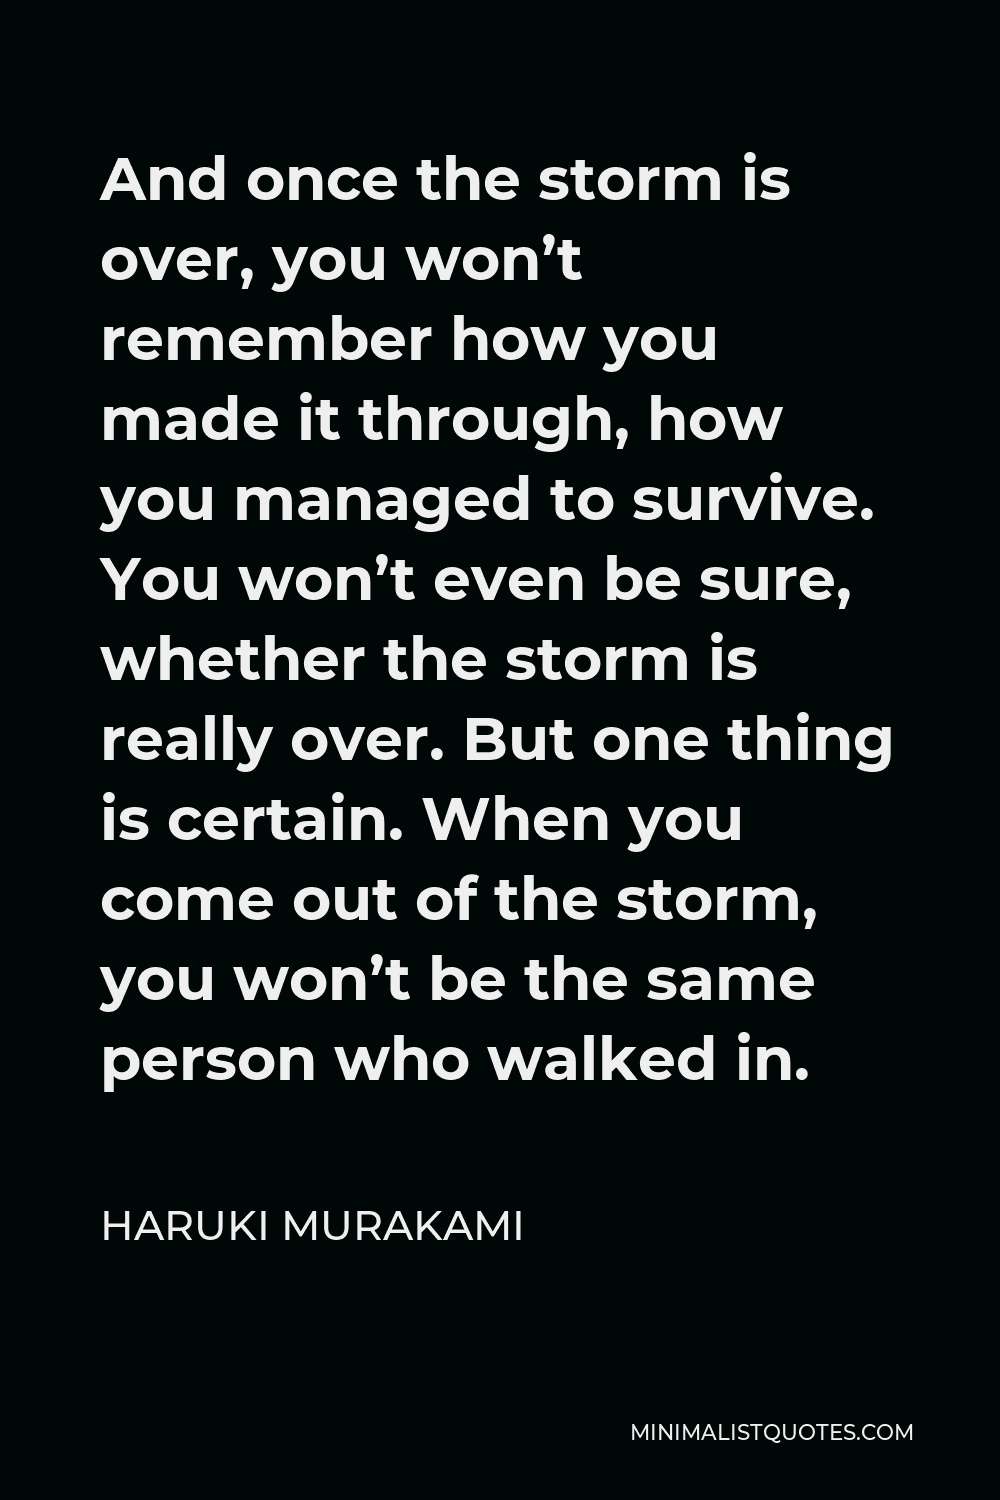 Haruki Murakami Quote - And once the storm is over, you won’t remember how you made it through, how you managed to survive. You won’t even be sure, whether the storm is really over. But one thing is certain. When you come out of the storm, you won’t be the same person who walked in.